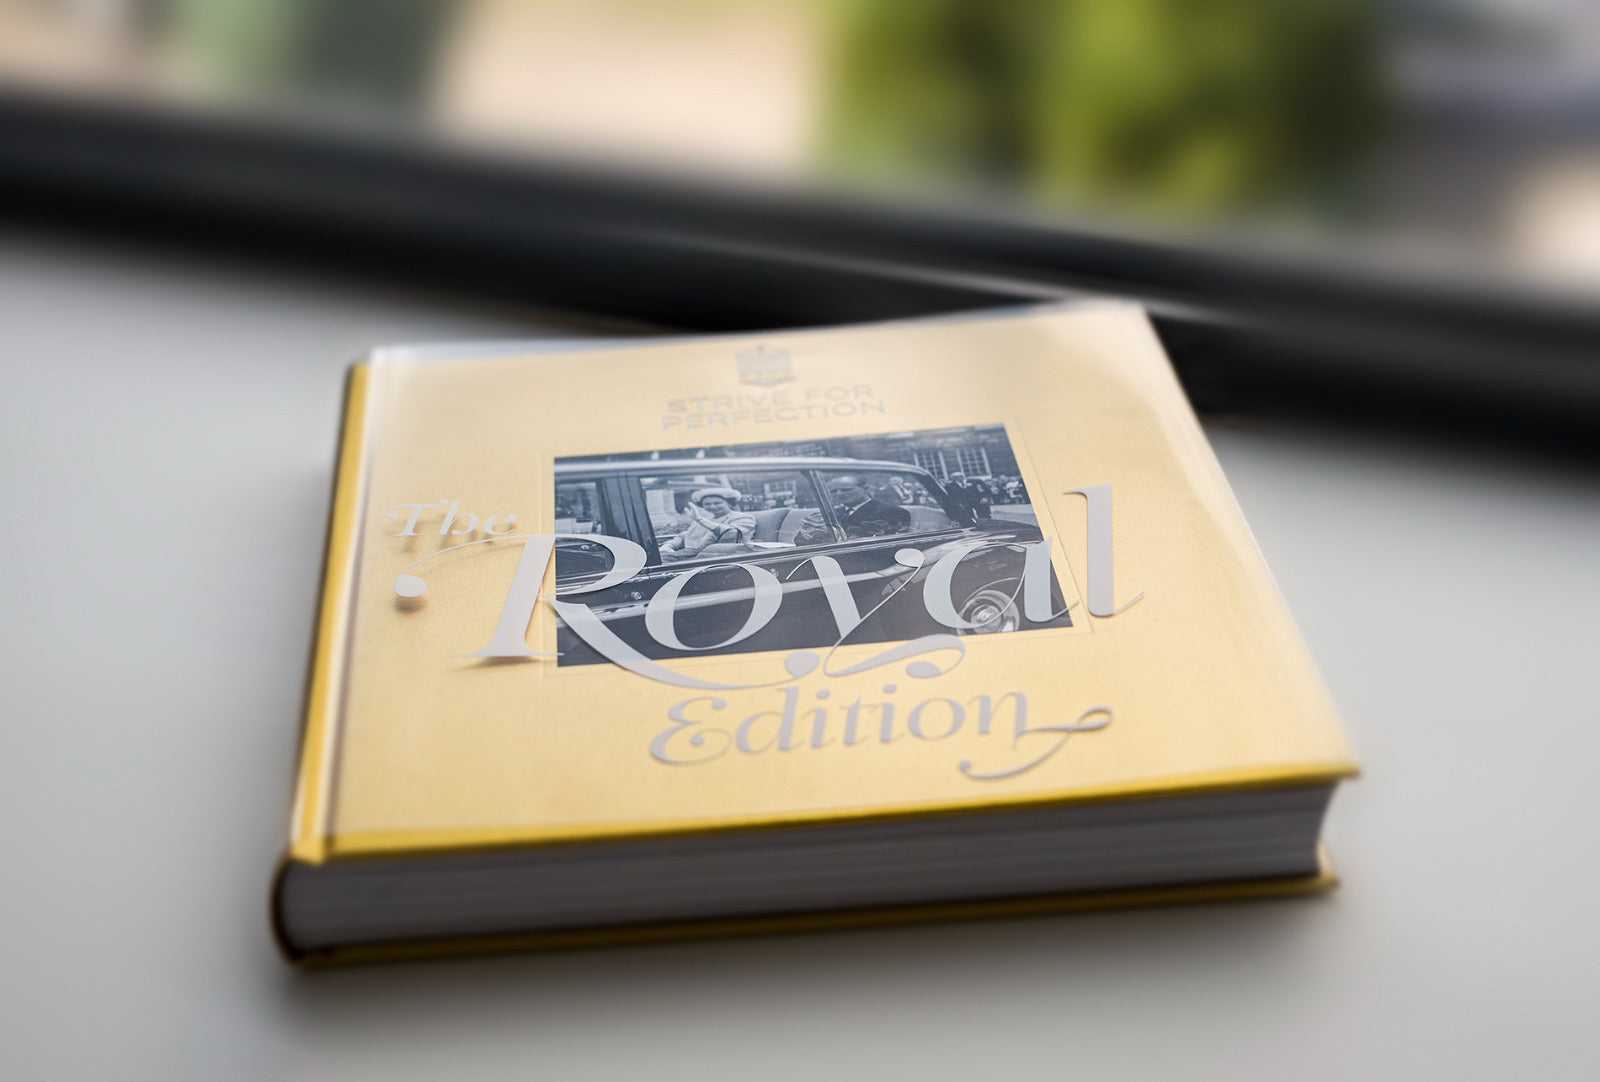 Meze Audio Featured in Exclusive Rolls Royce Enthusiasts’ Club Publication, Strive for Perfection: The Royal Edition